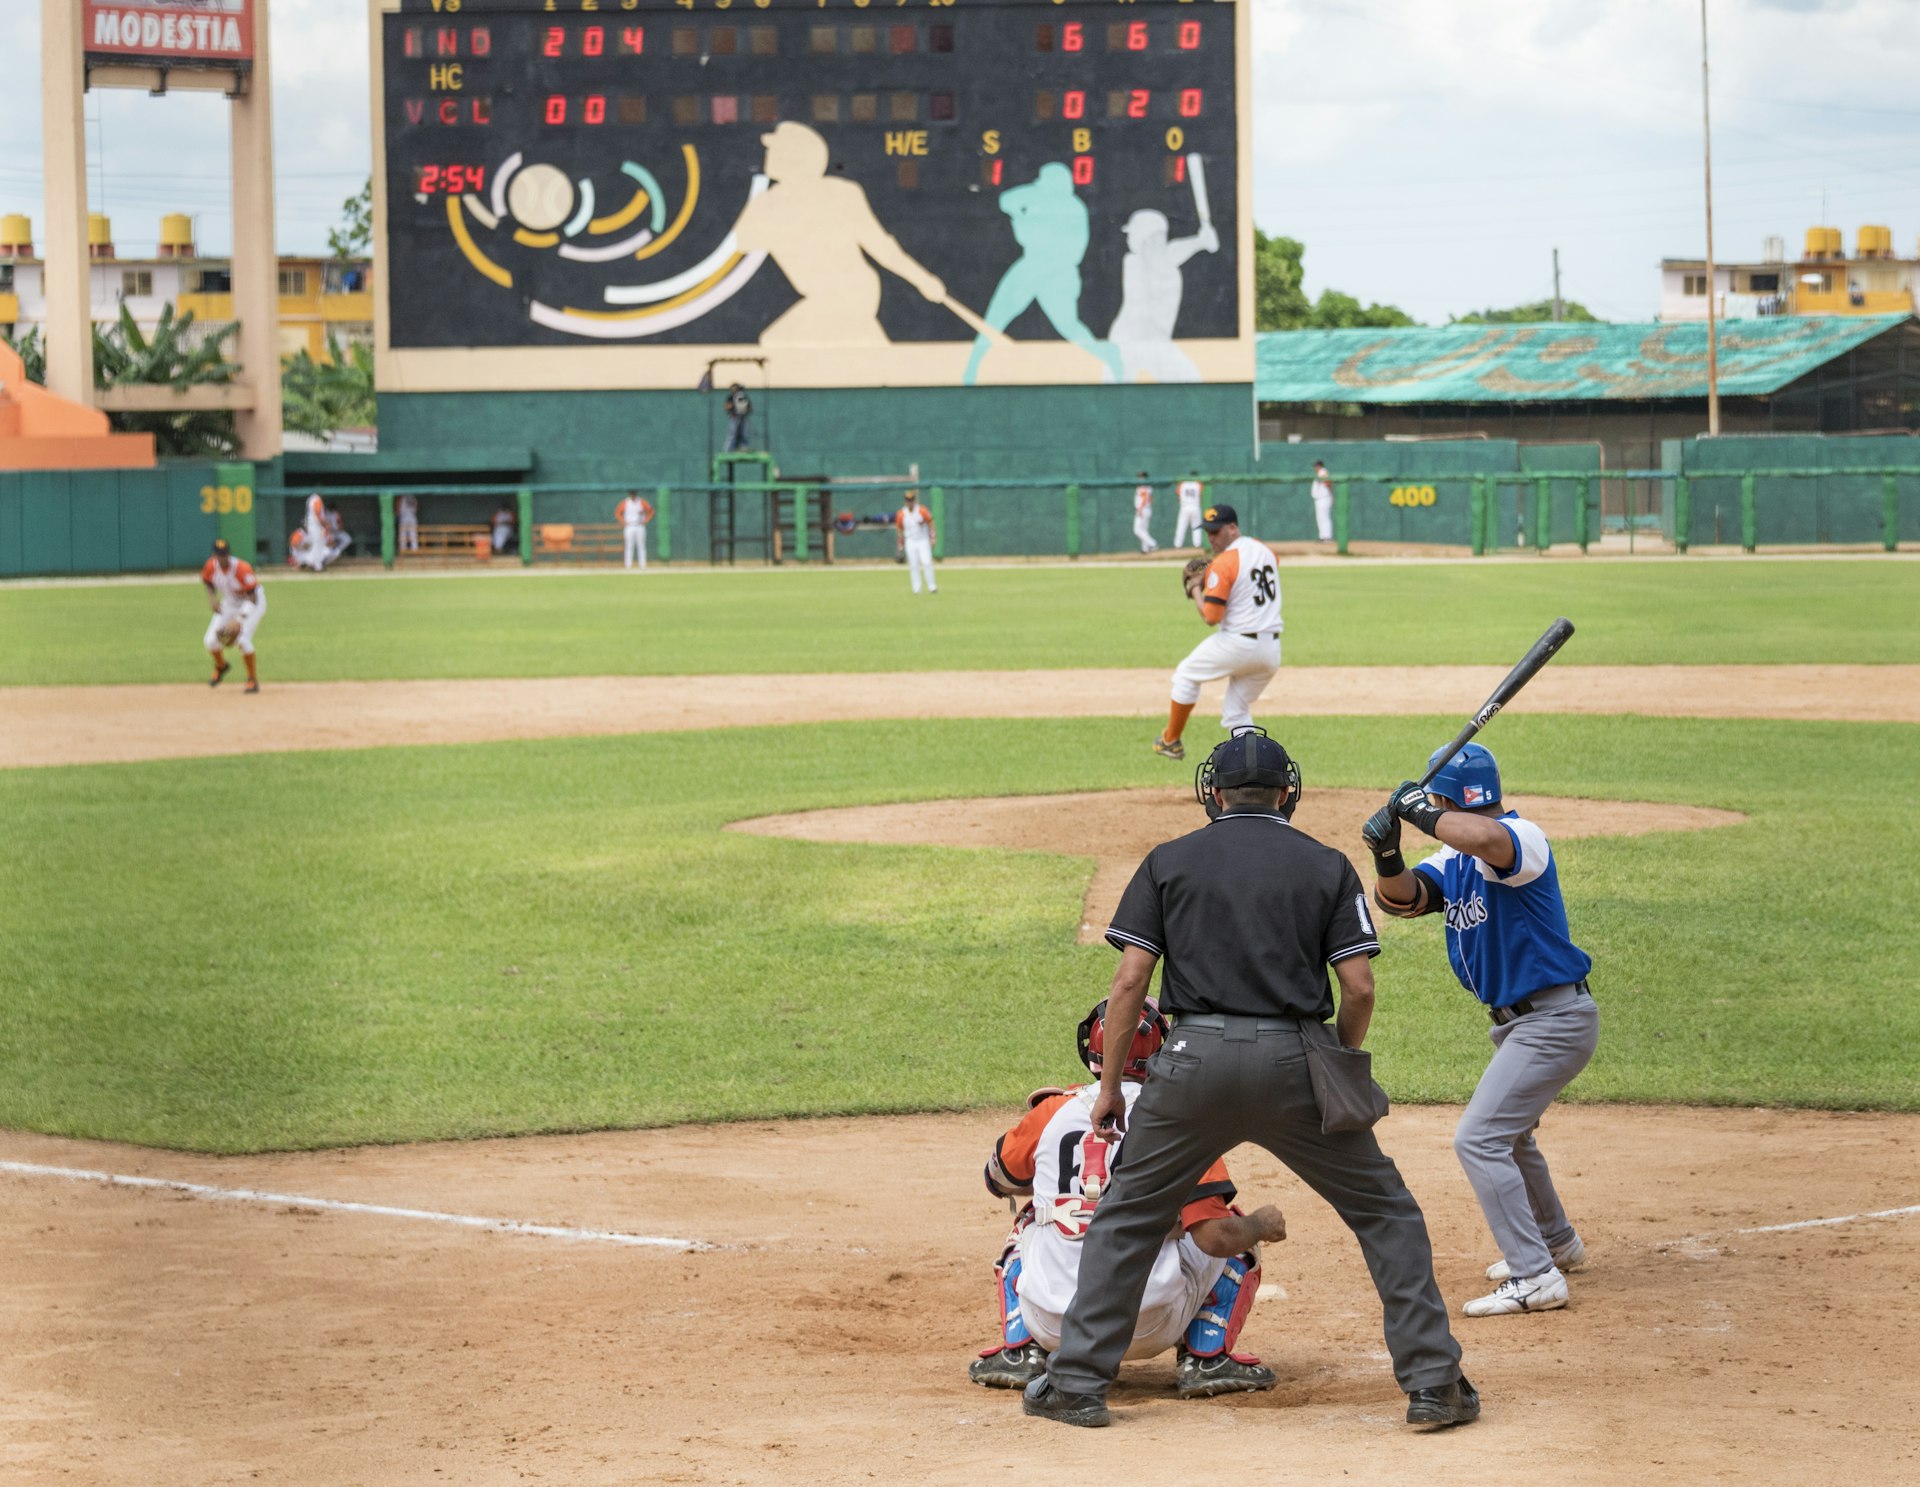 One of Cuba's oldest baseball organizations, Industriales (player in blue), is one of the most loved and hated teams in the country. Roberto Machado Noa/LightRocket via Getty Images 